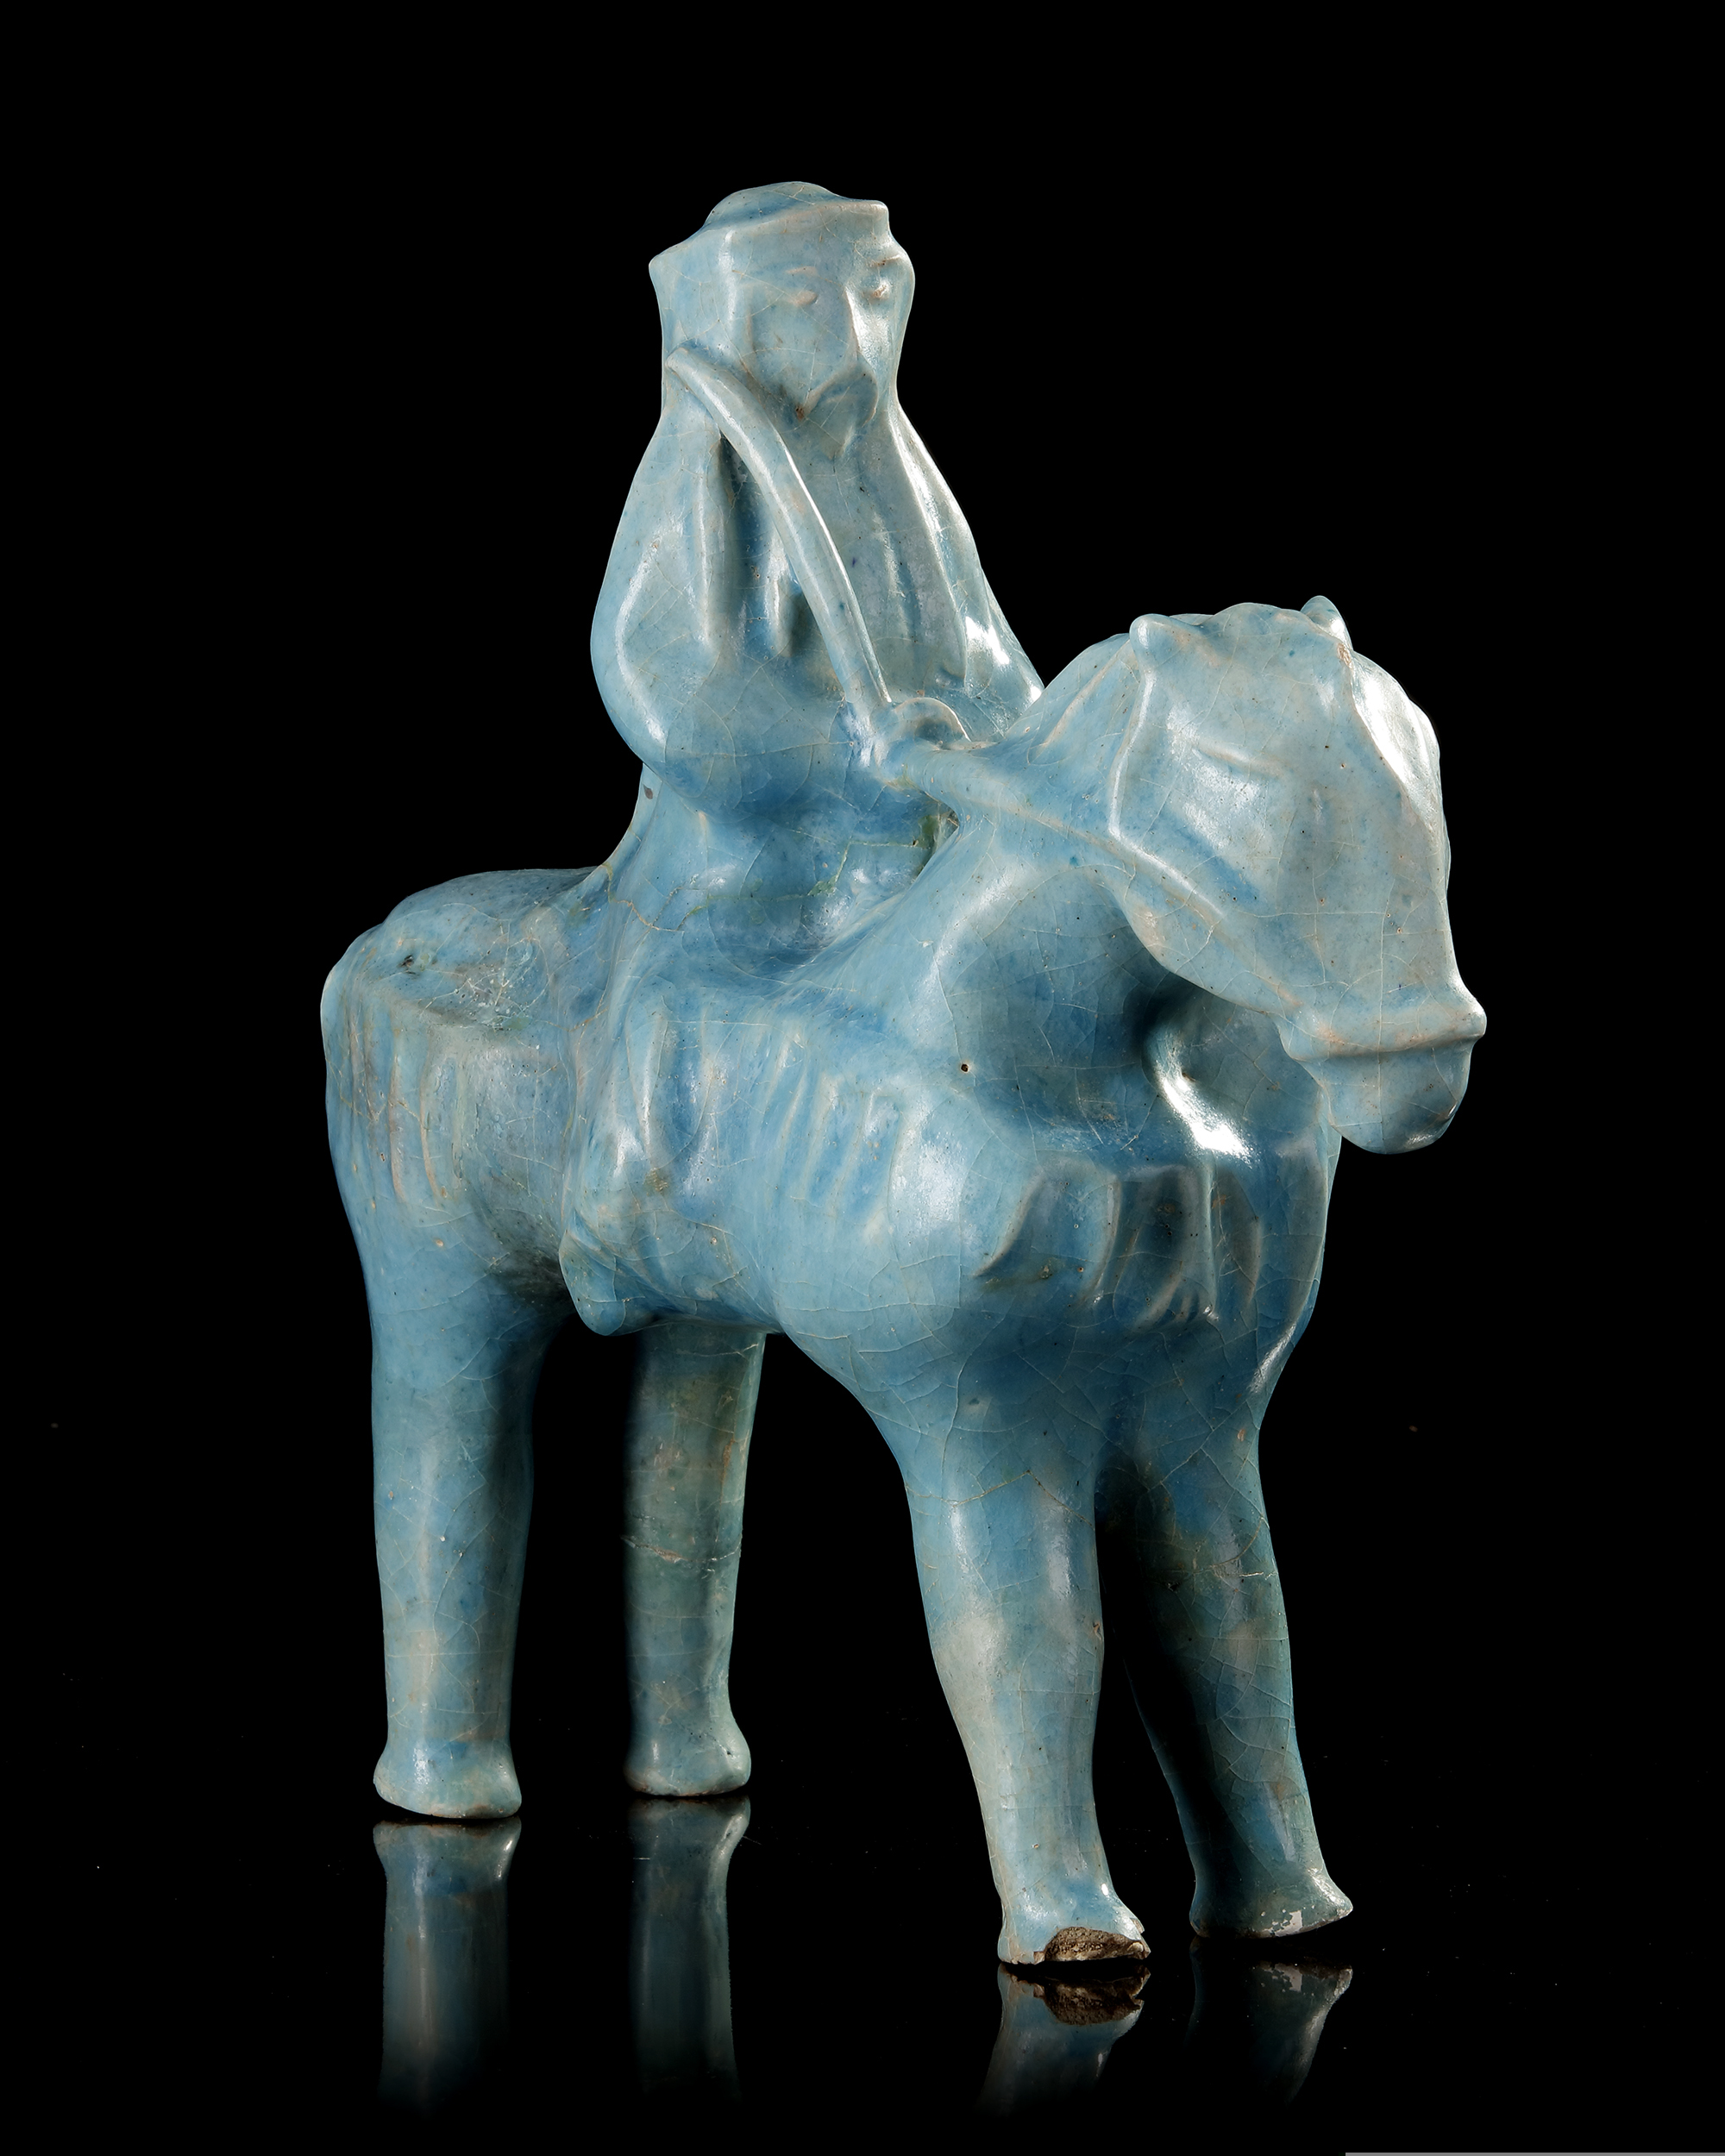 A RARE KASHAN TURQUOISE-GLAZED FIGURE OF A MONGOL, PERSIA, 13TH CENTURY - Image 5 of 7